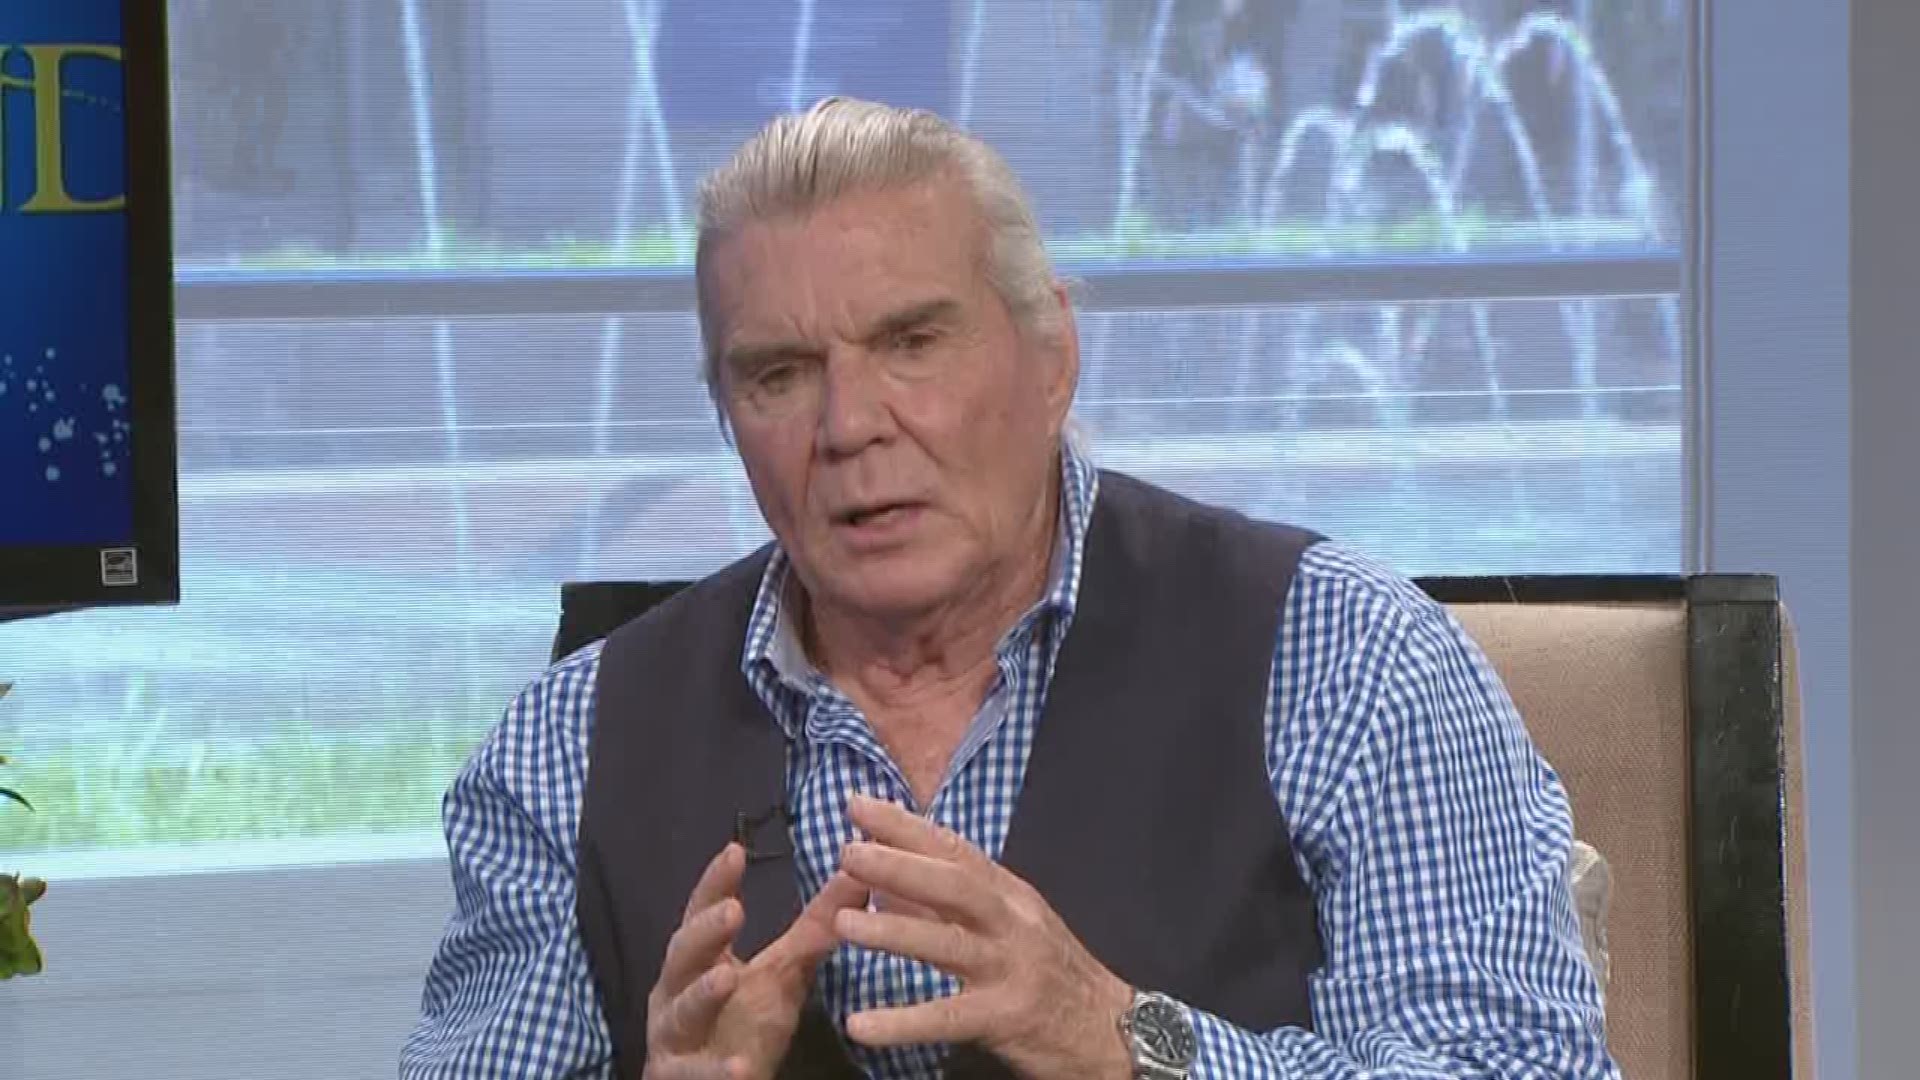  John Davidson on stage with 'Finding Neverland'